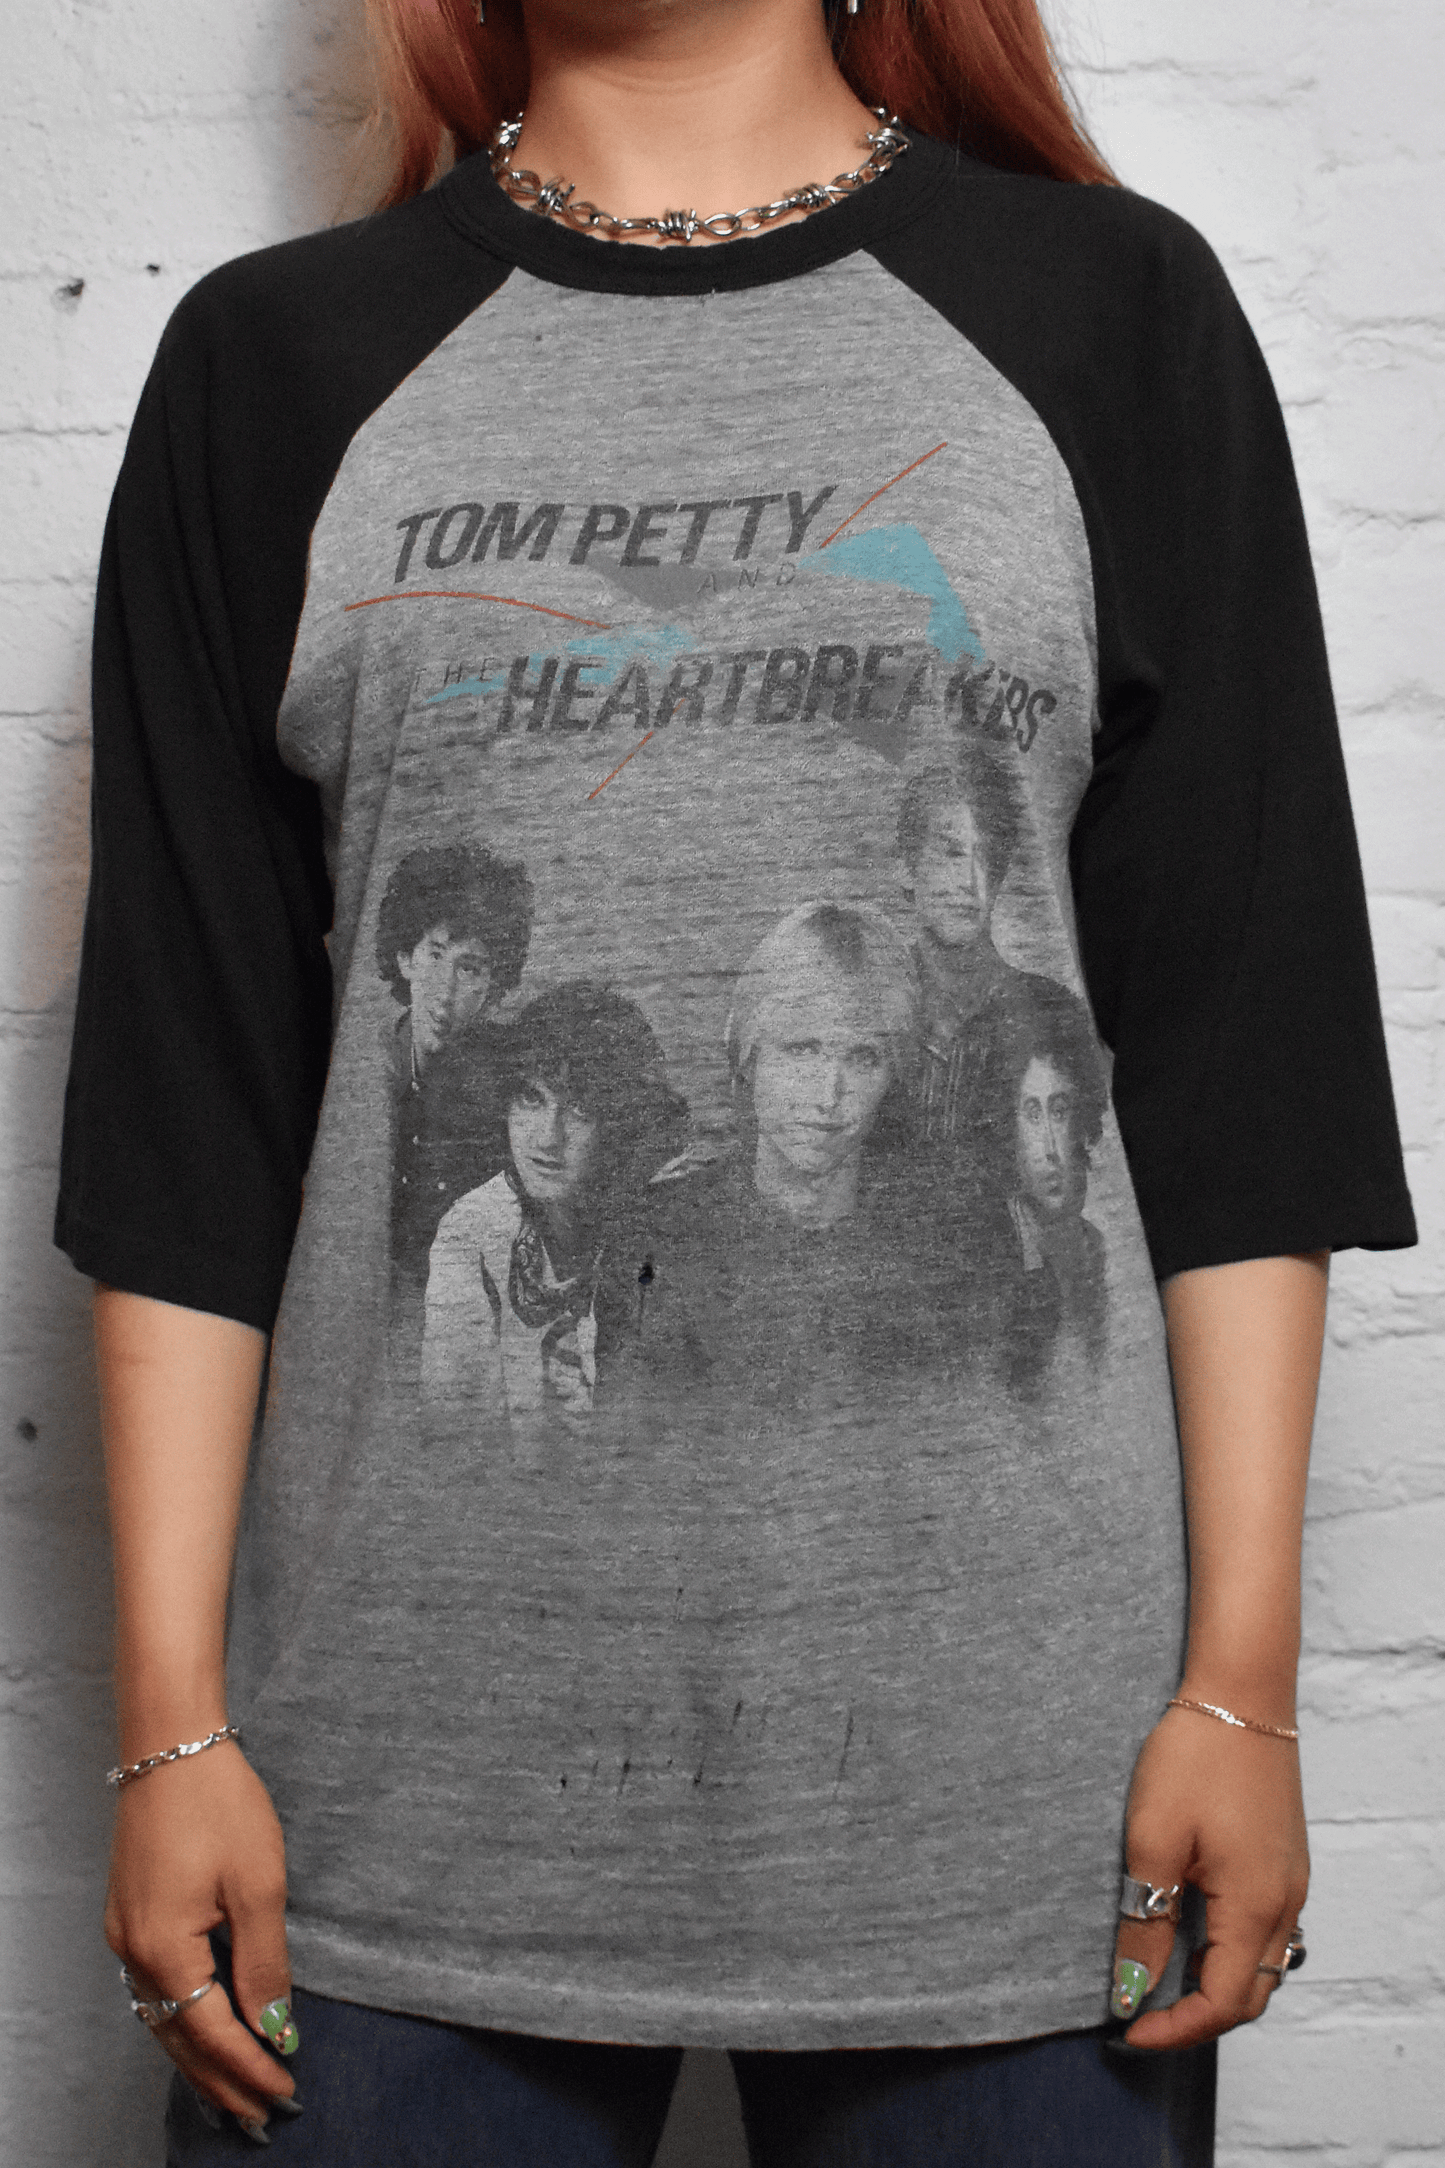 Vintage 1983 "Tom Petty and The Heartbreakers" Tour T-shirt